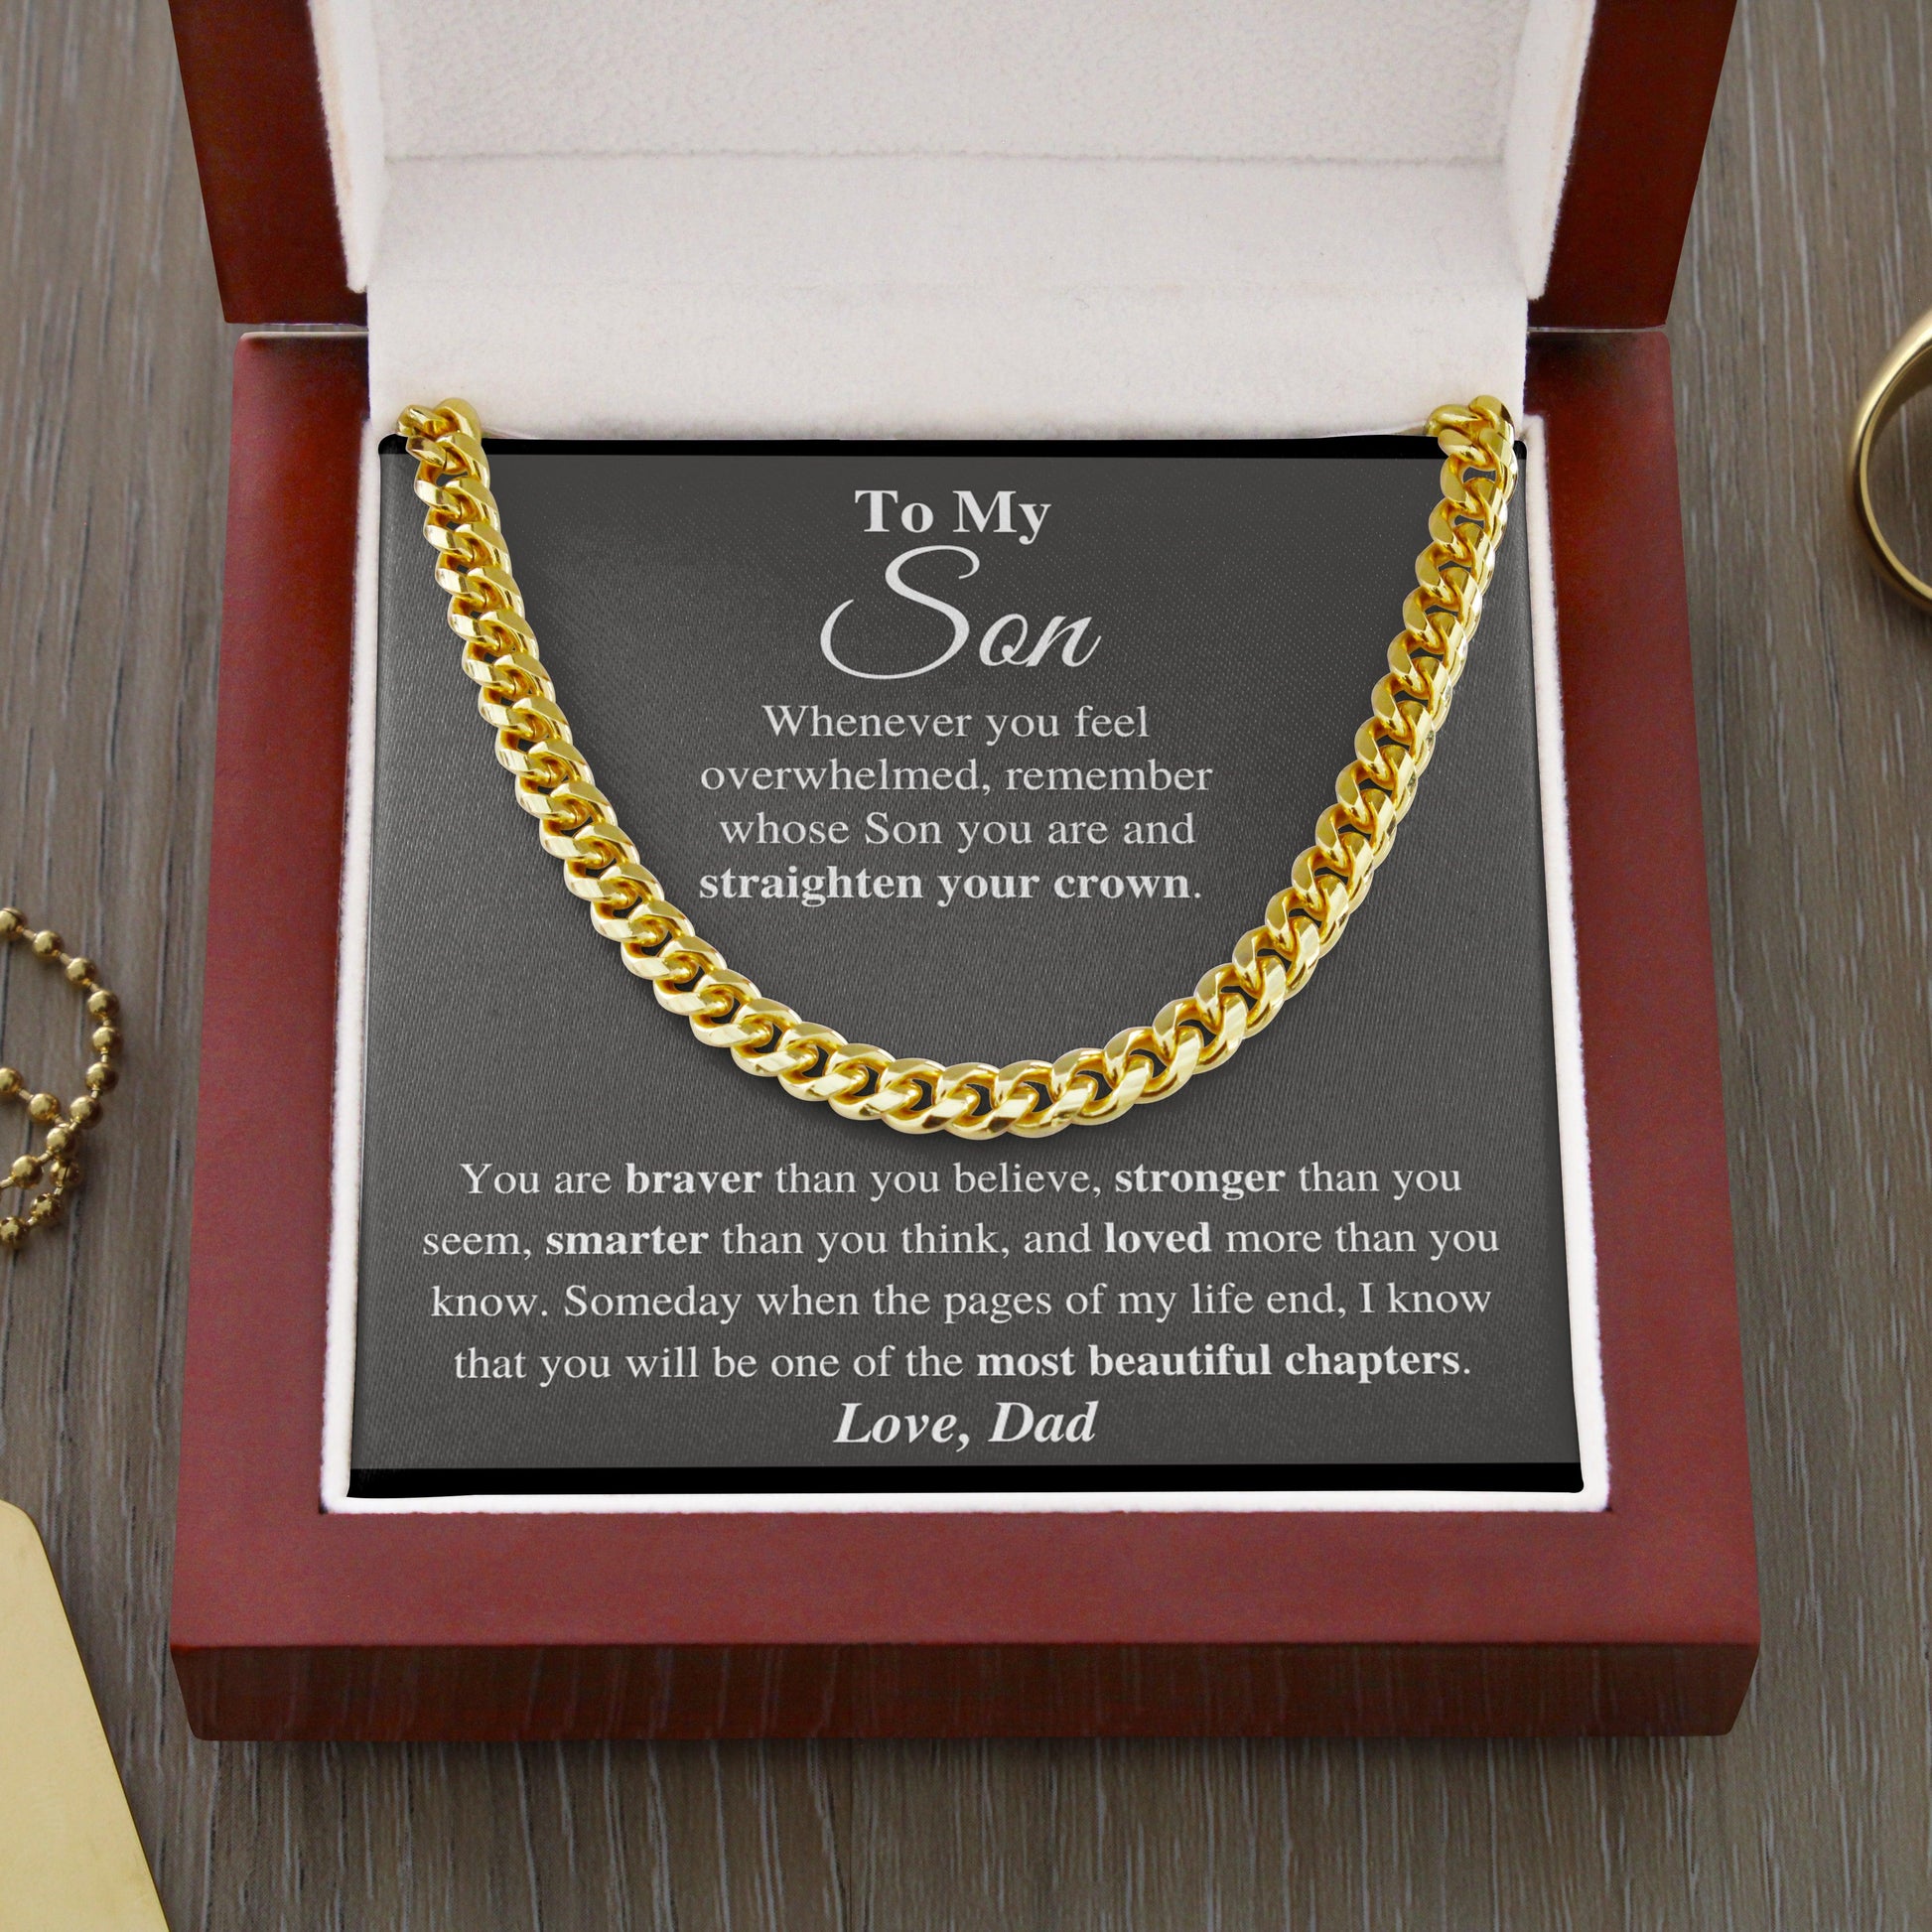 Jewelry gifts Son - Strong Heart - Cuban Link Chain - Belesmé - Memorable Jewelry Gifts 